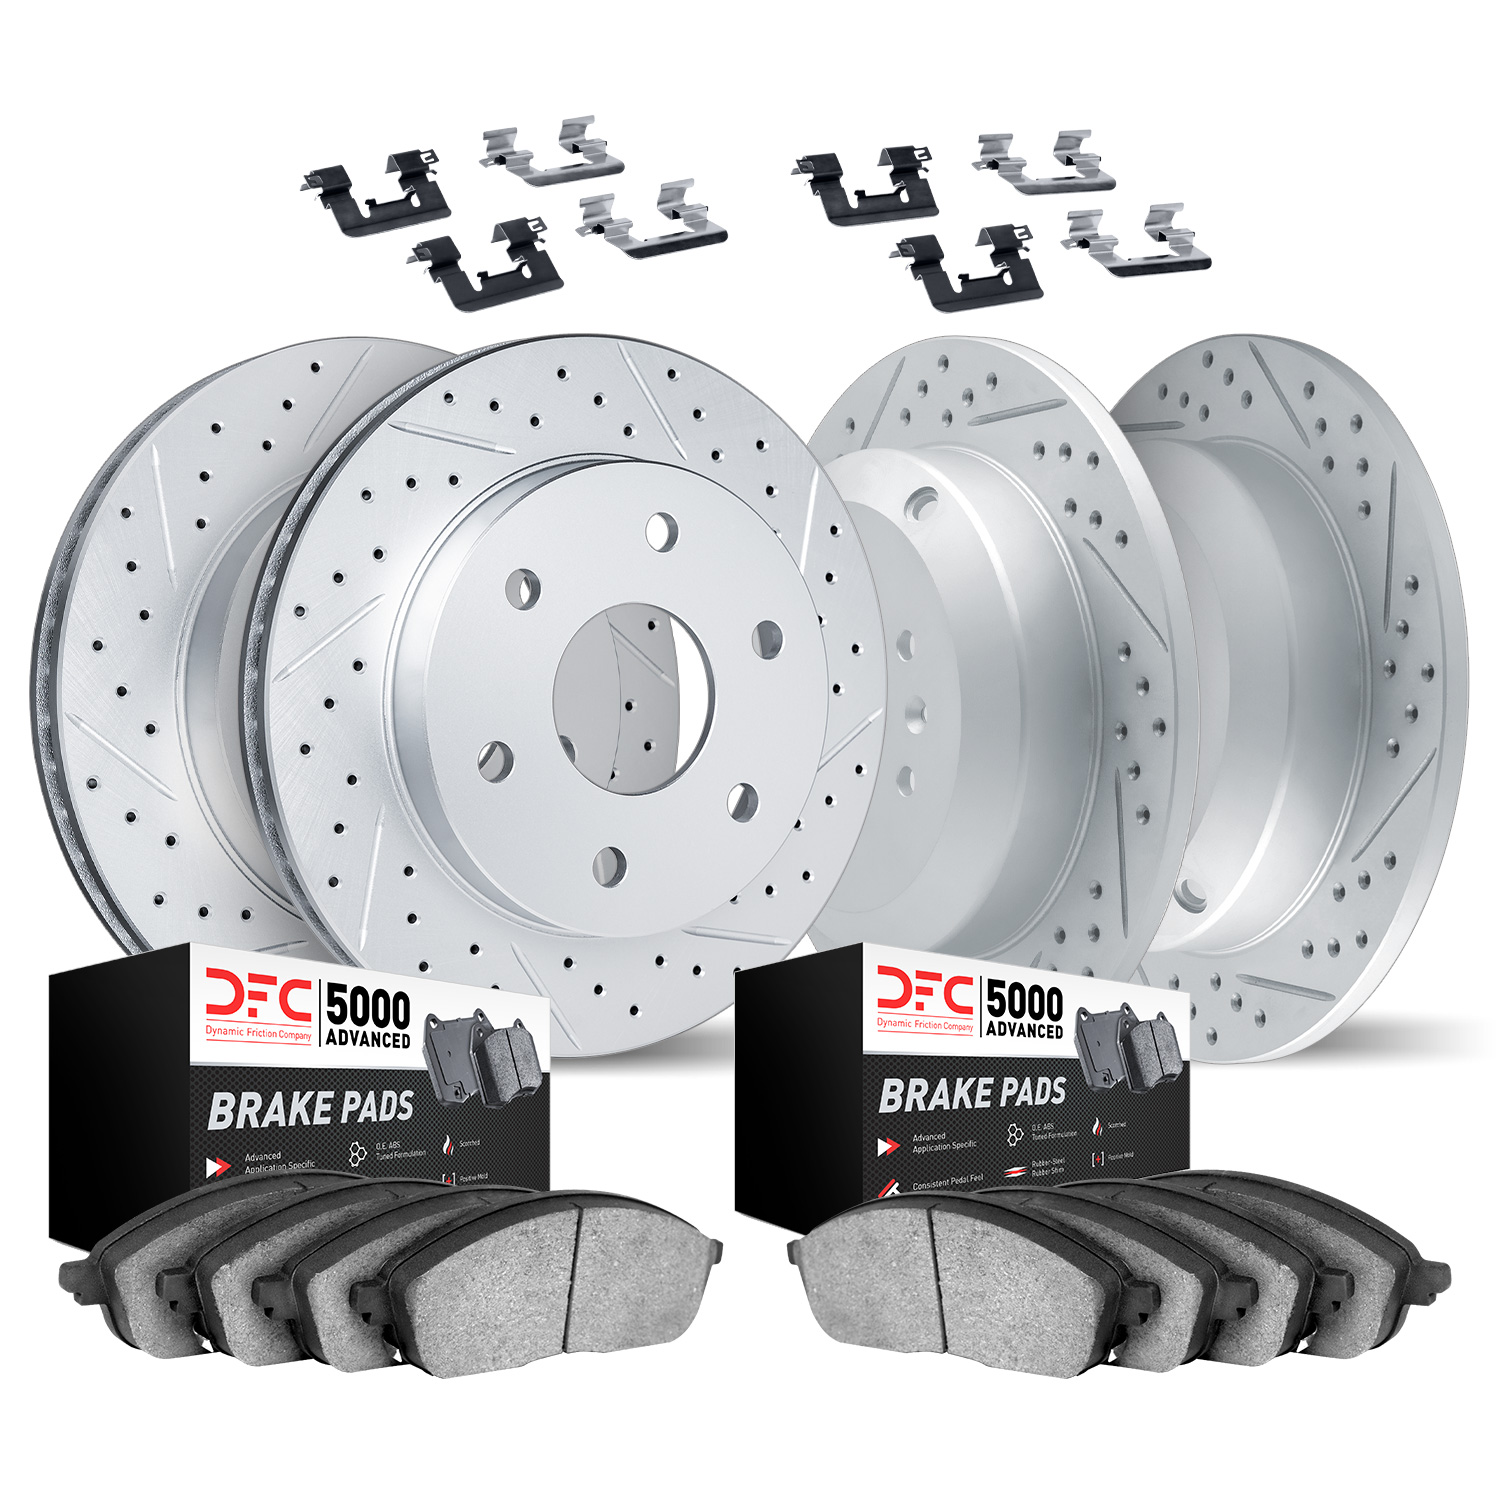 2514-93001 Geoperformance Drilled/Slotted Rotors w/5000 Advanced Brake Pads Kit & Hardware, 2006-2010 GM, Position: Front and Re